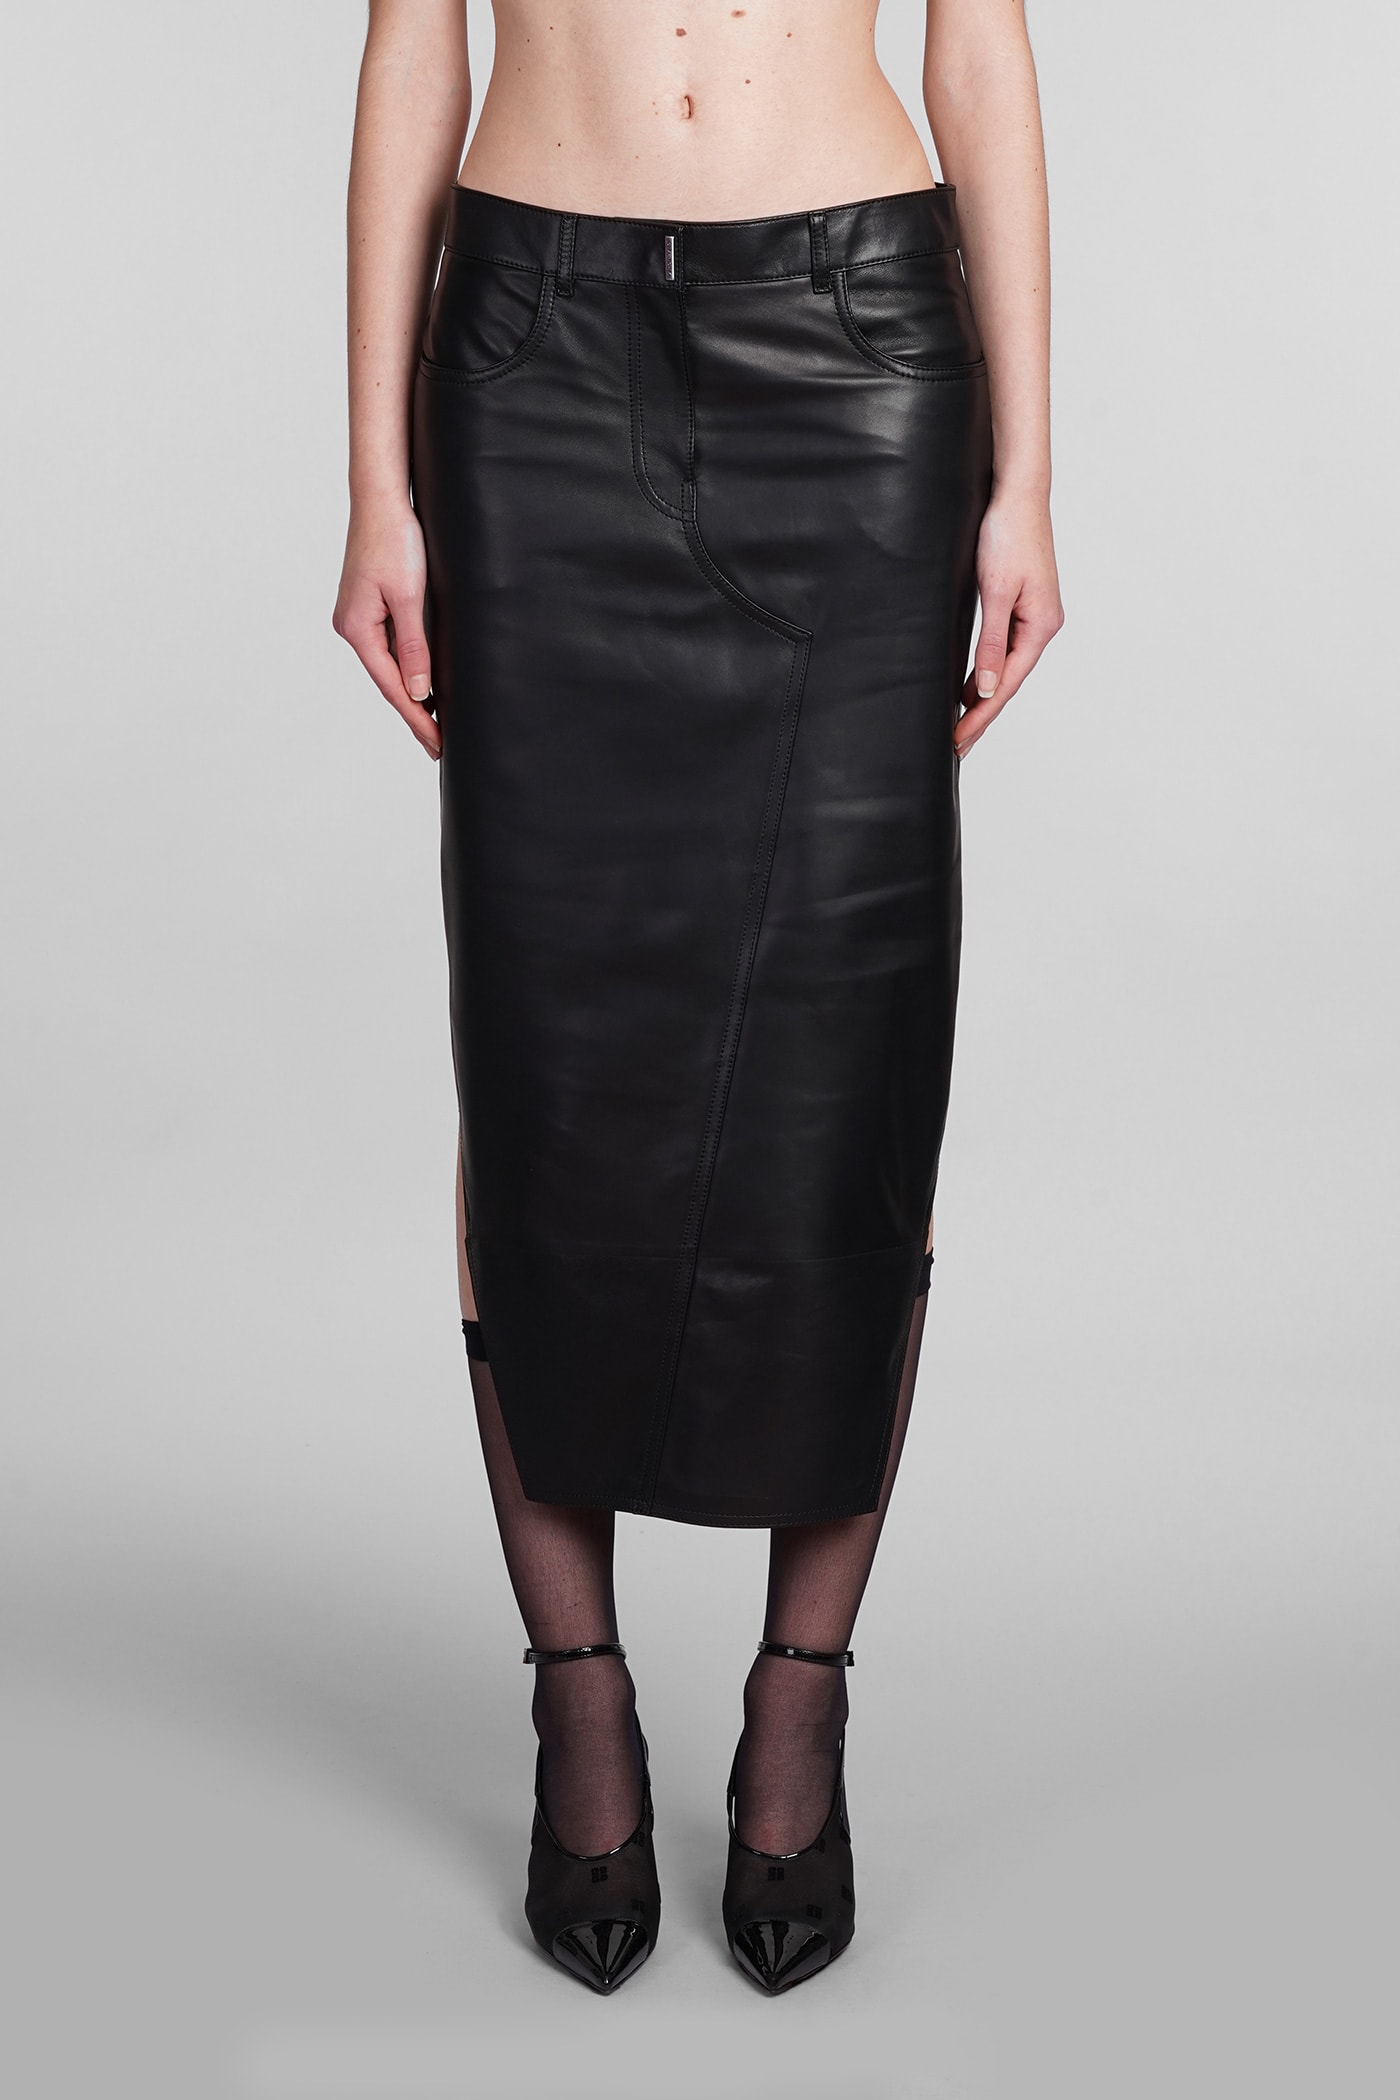 Givenchy Skirt In Black Leather